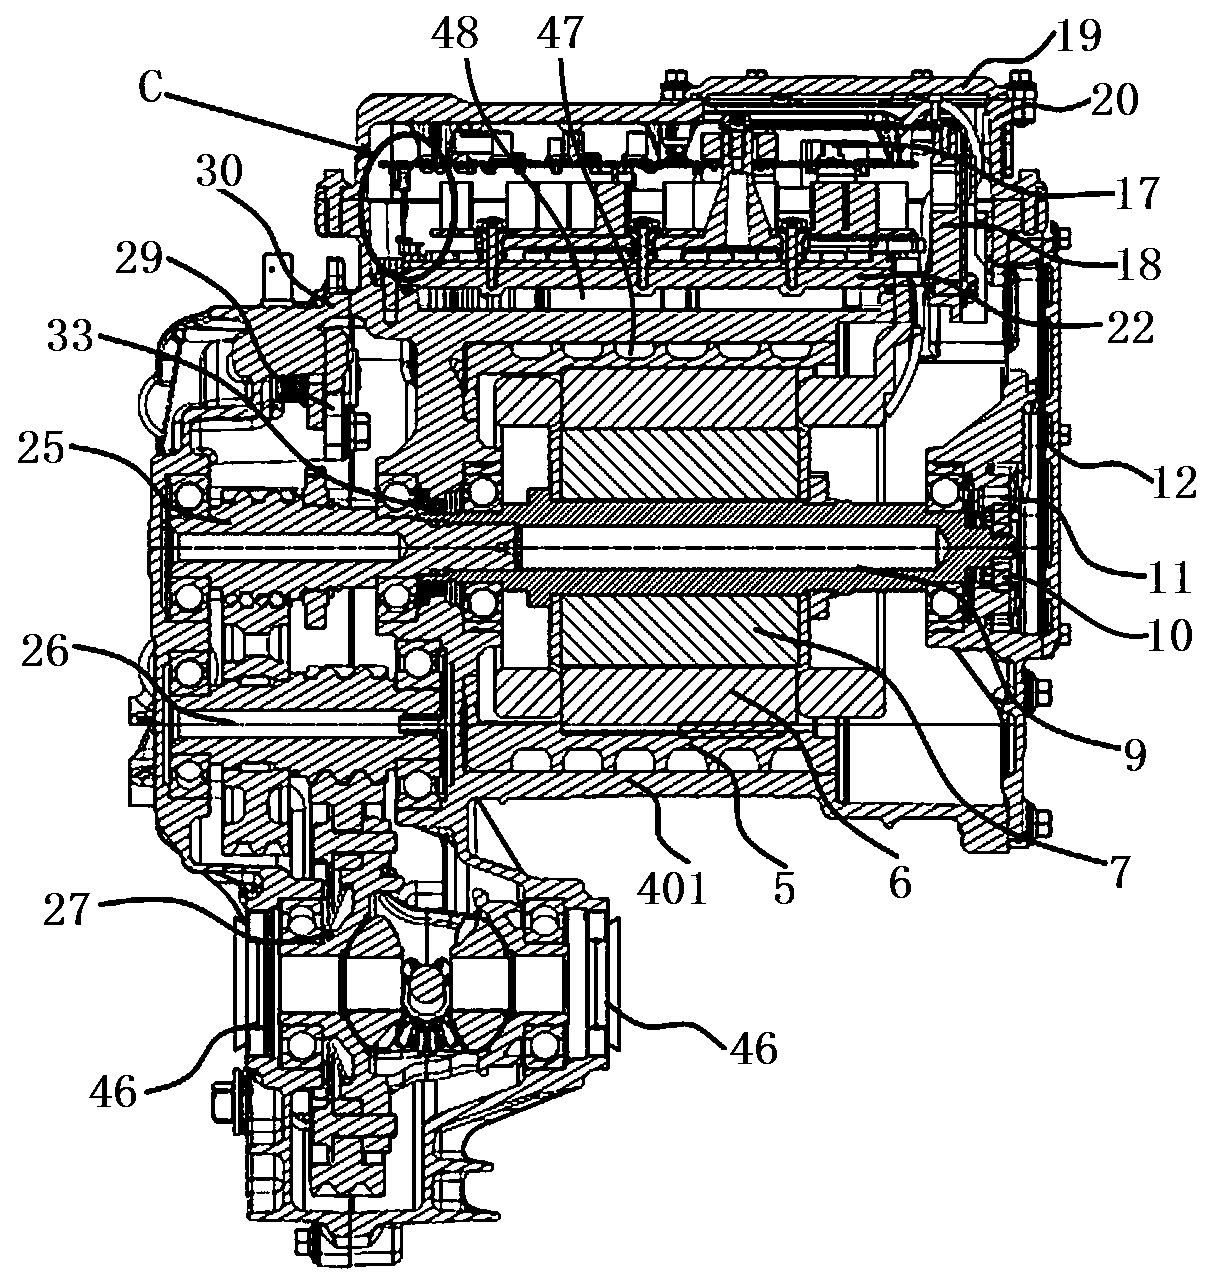 Deeply integrated electric drive system